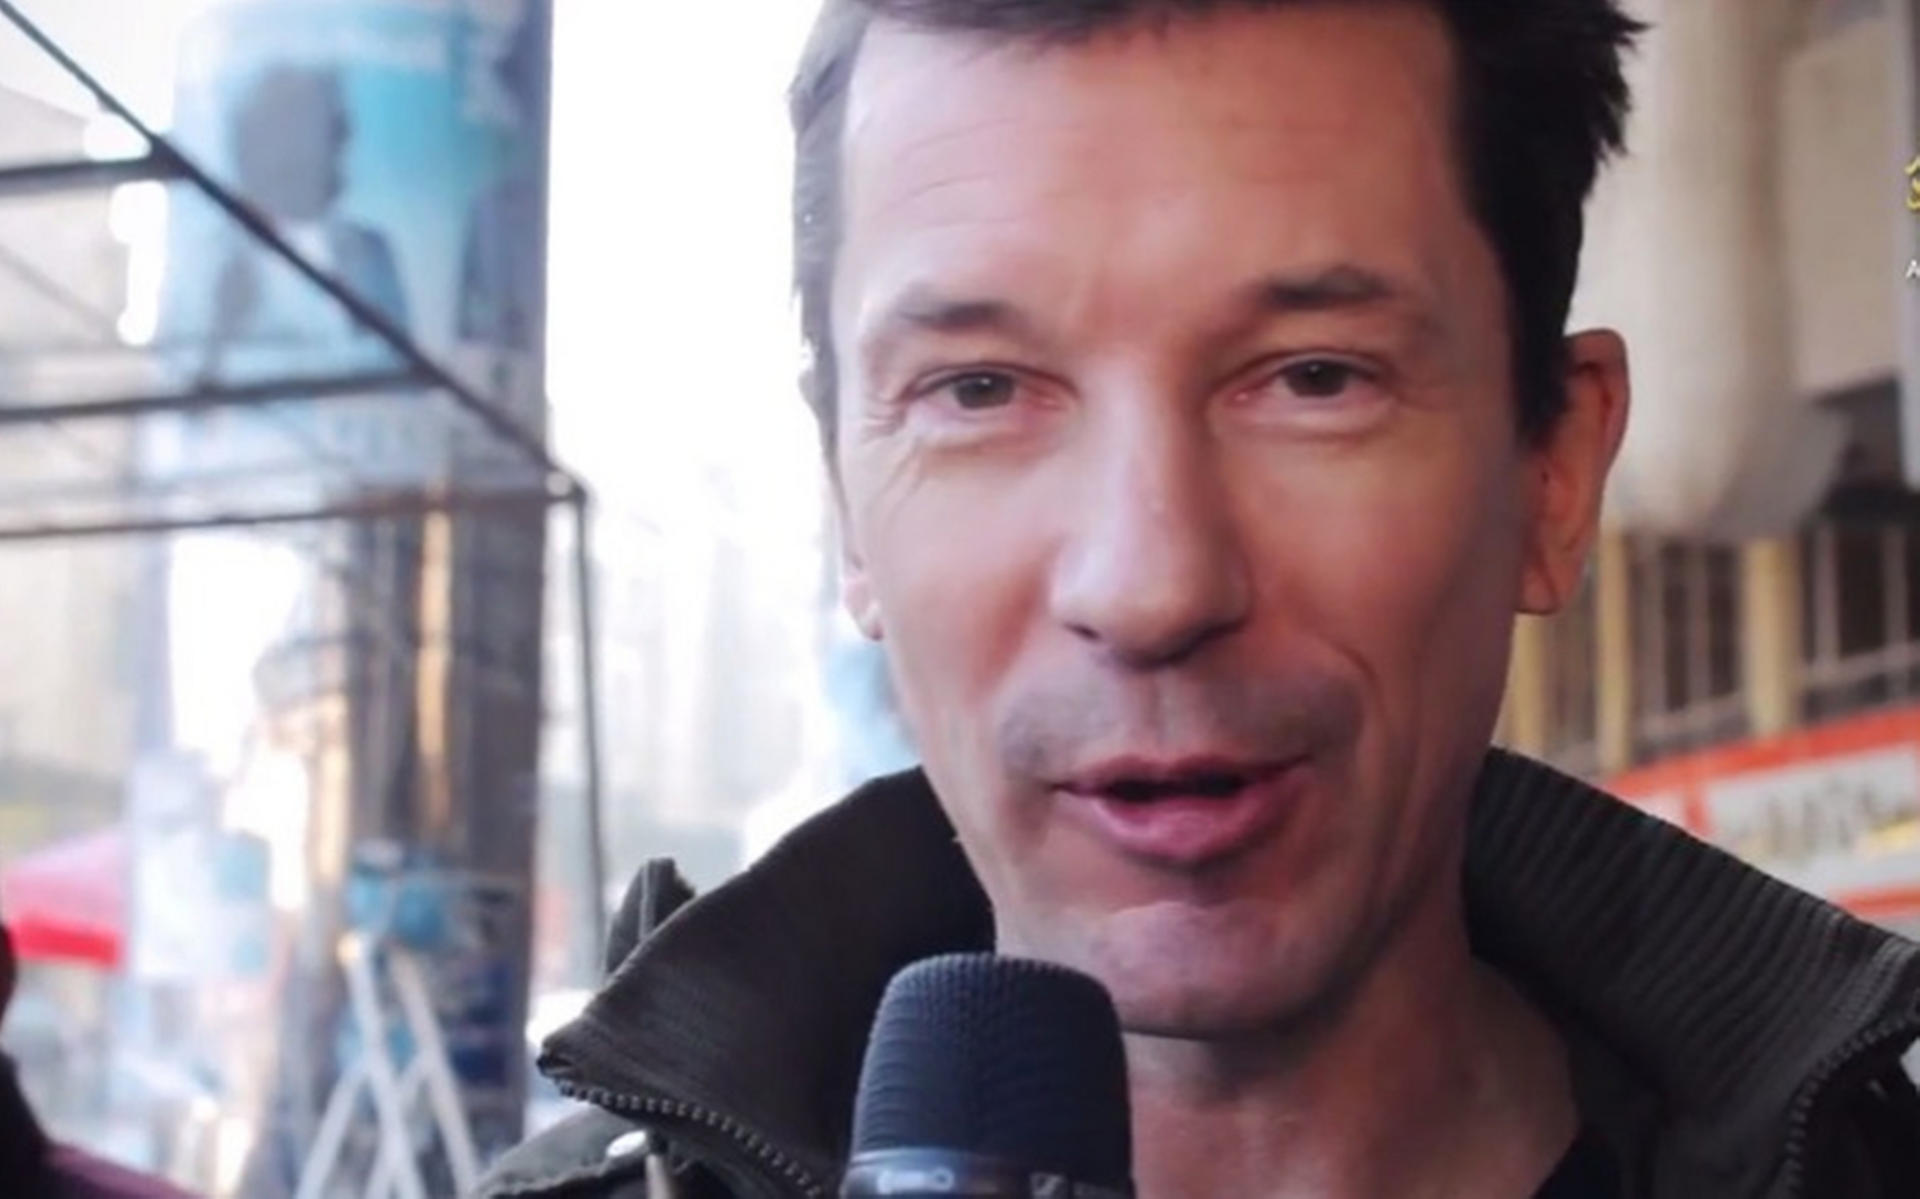 John Cantlie in the video says Mosul is not a city living in fear.